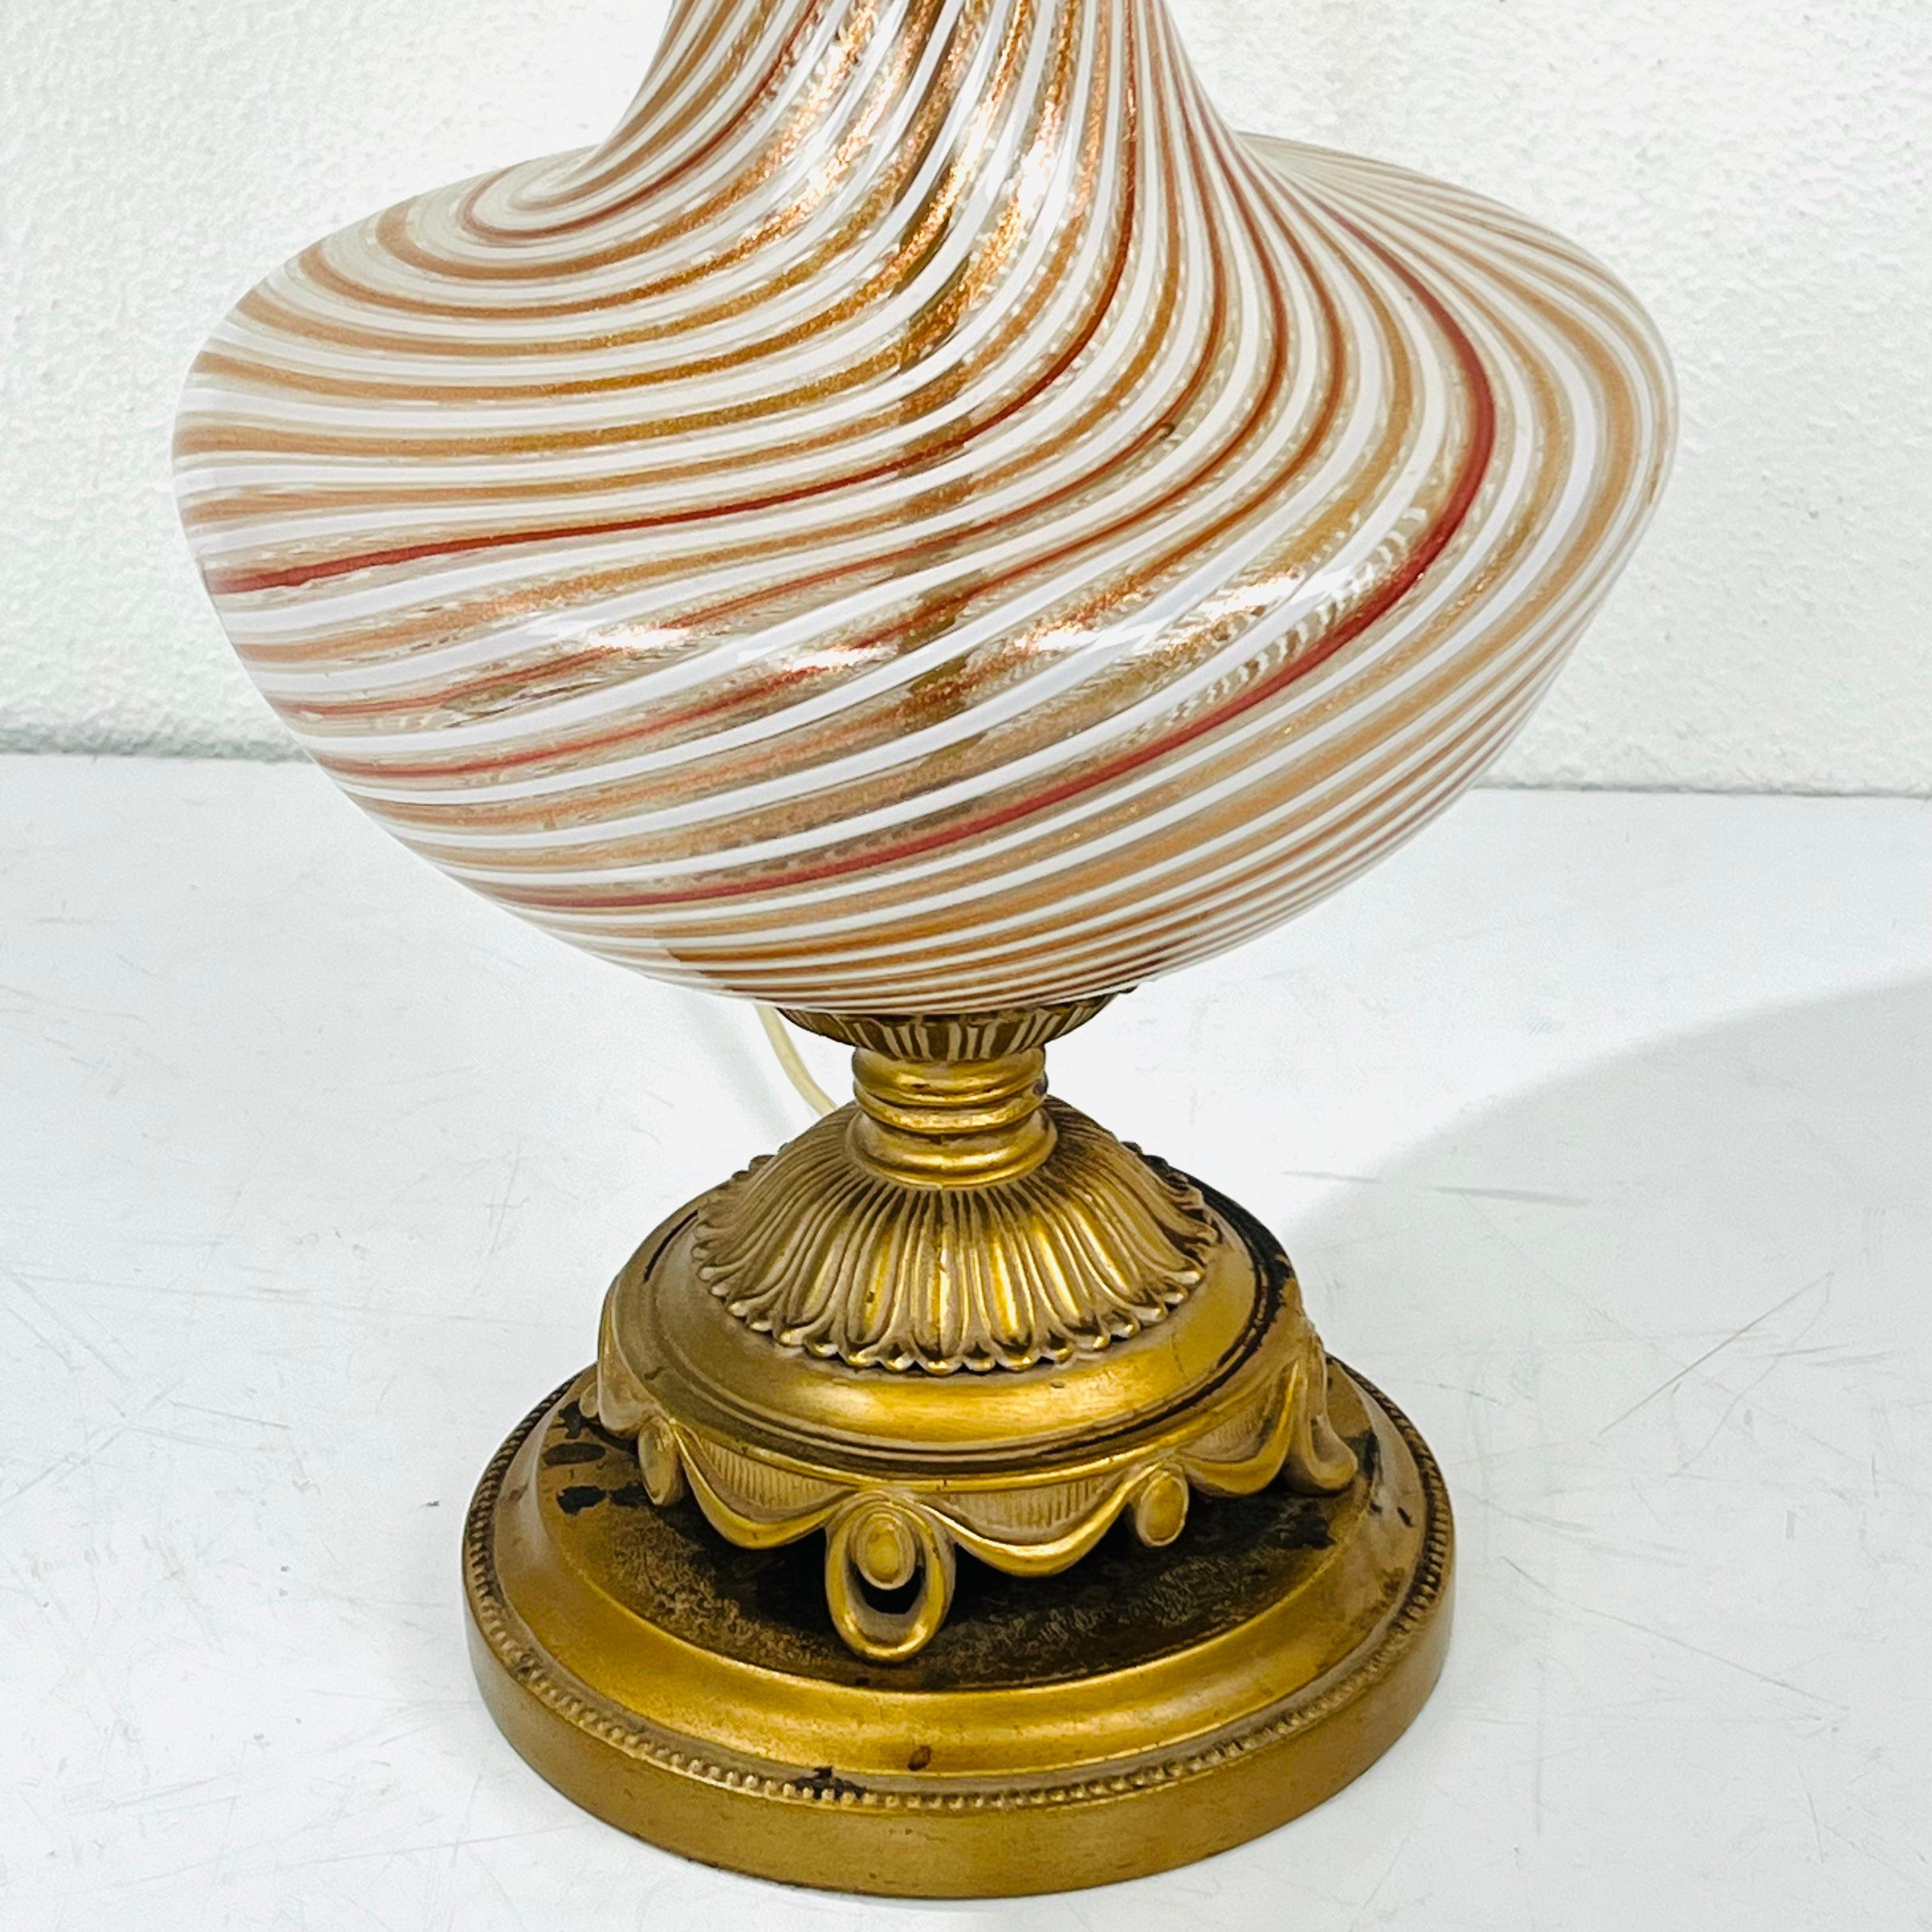 Italian Antique Murano Glass Lamp by Dino Martens For Sale